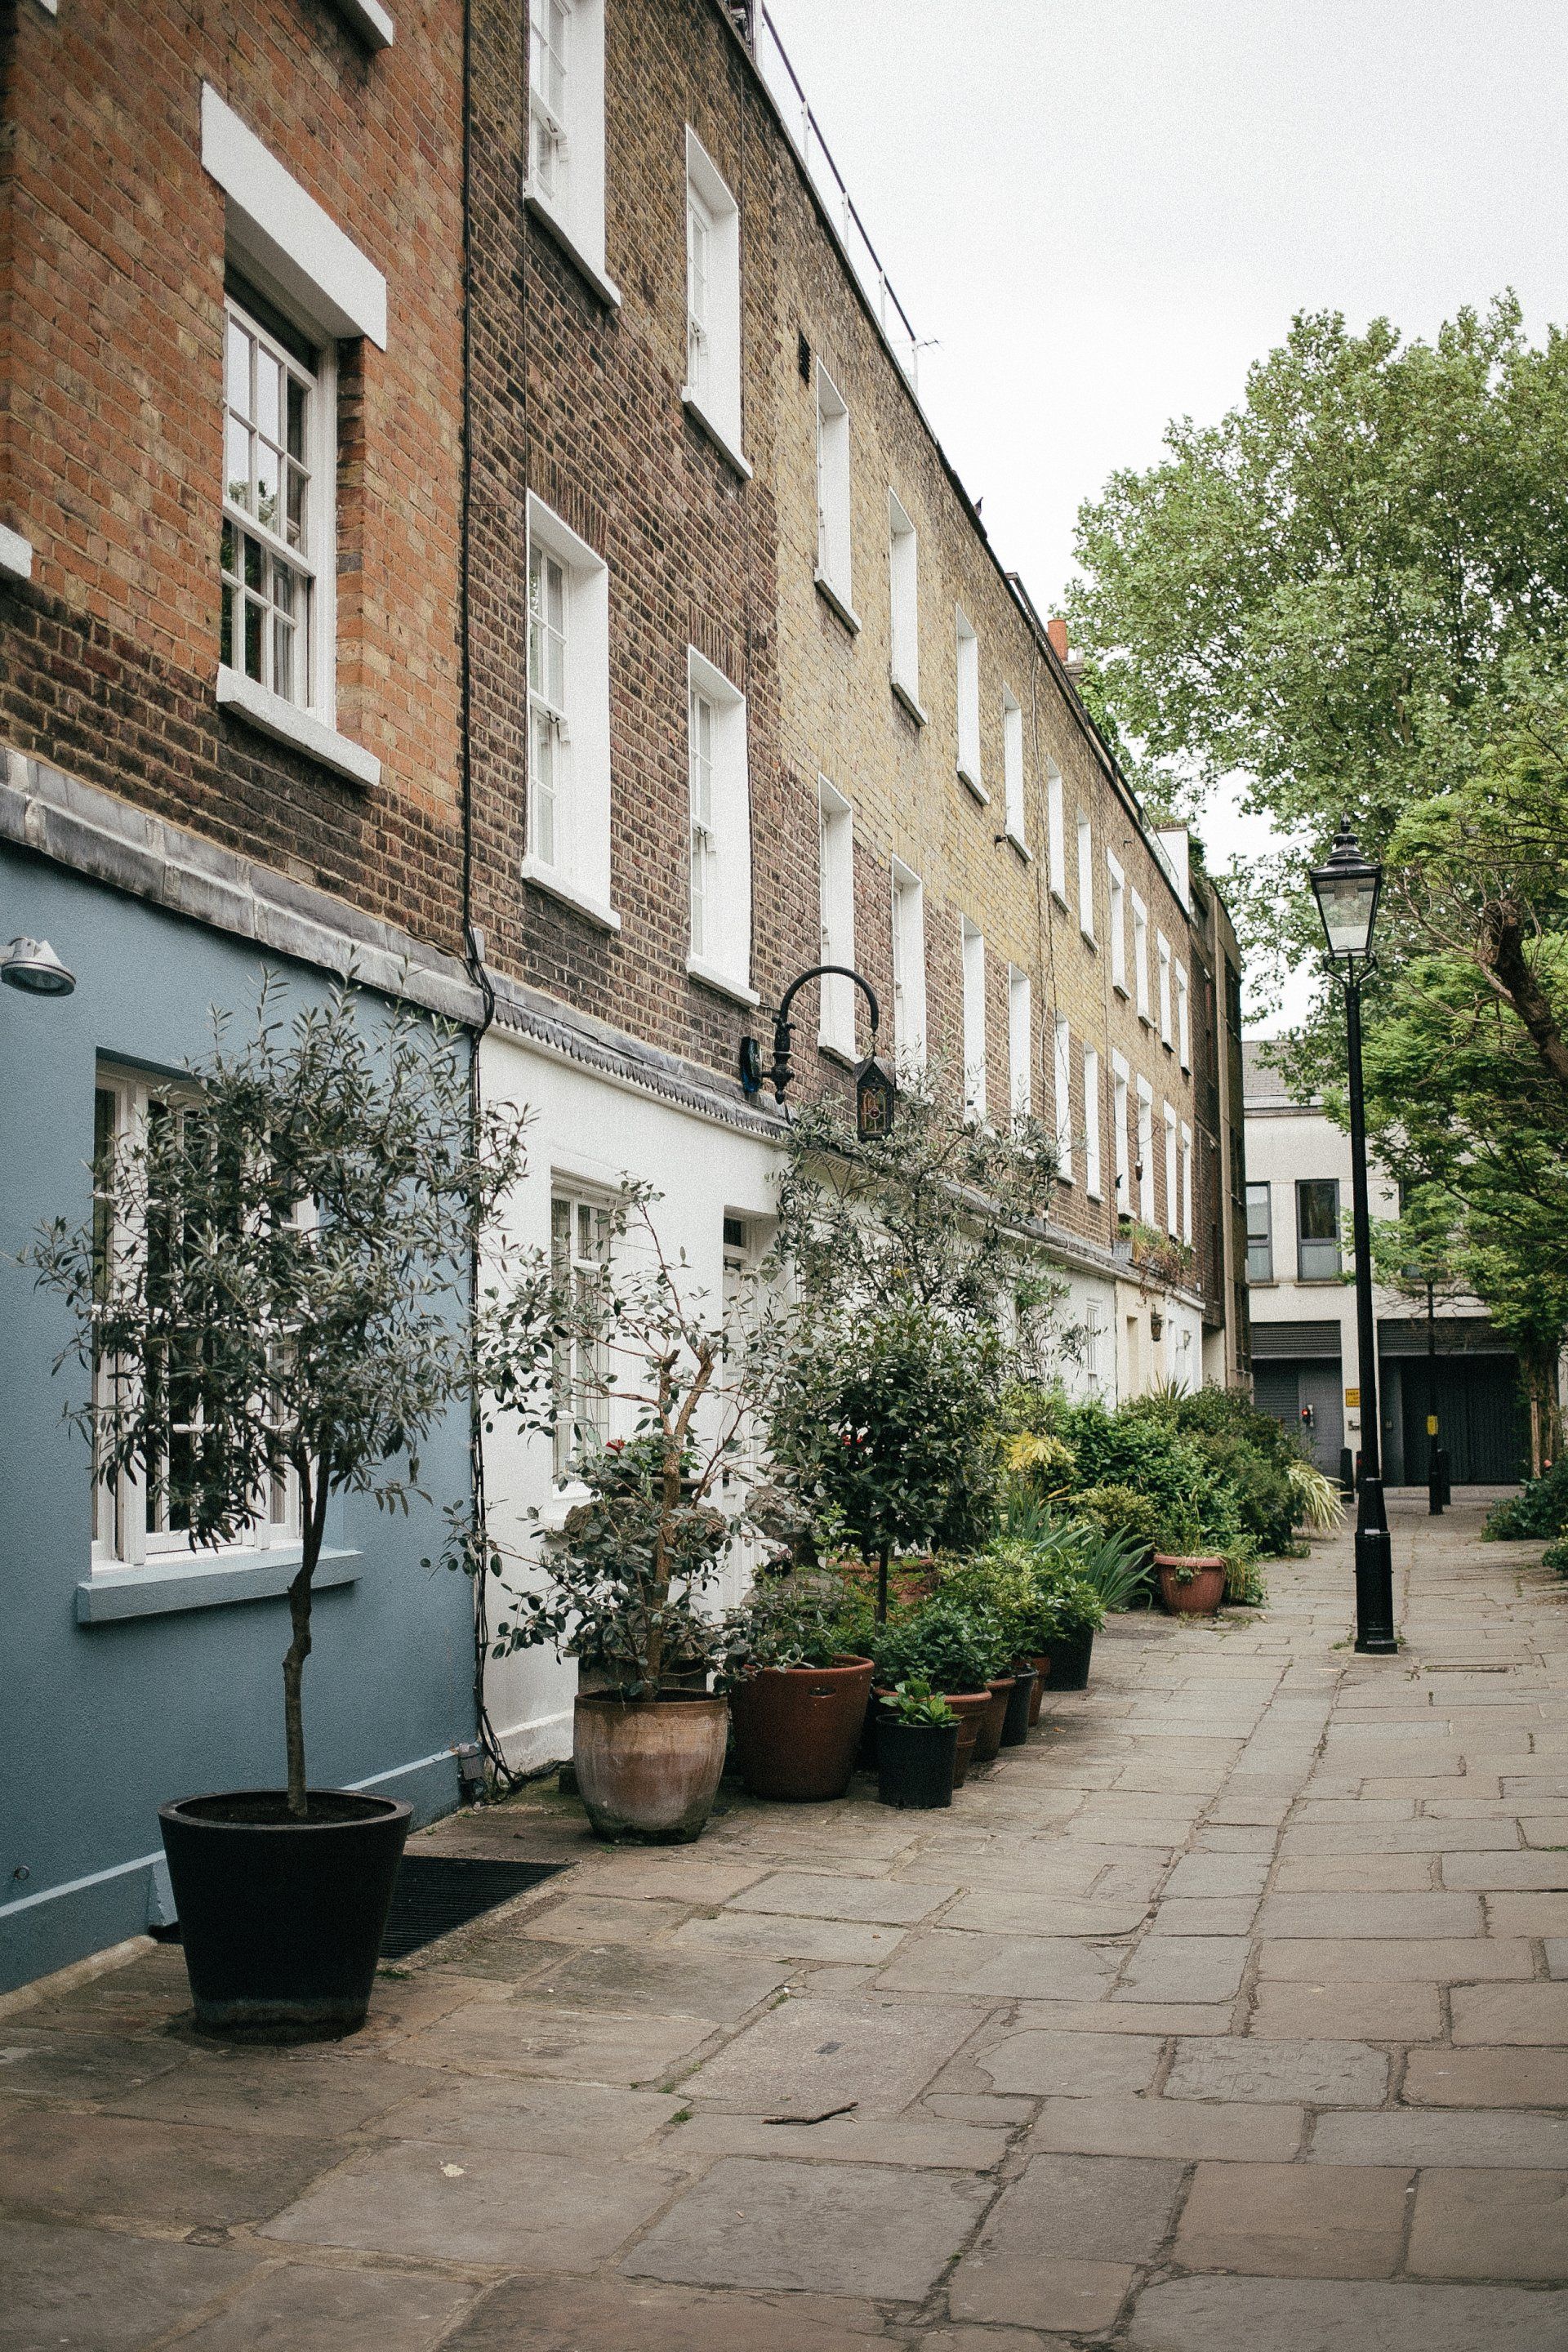 A picture of a row of London terraced properties